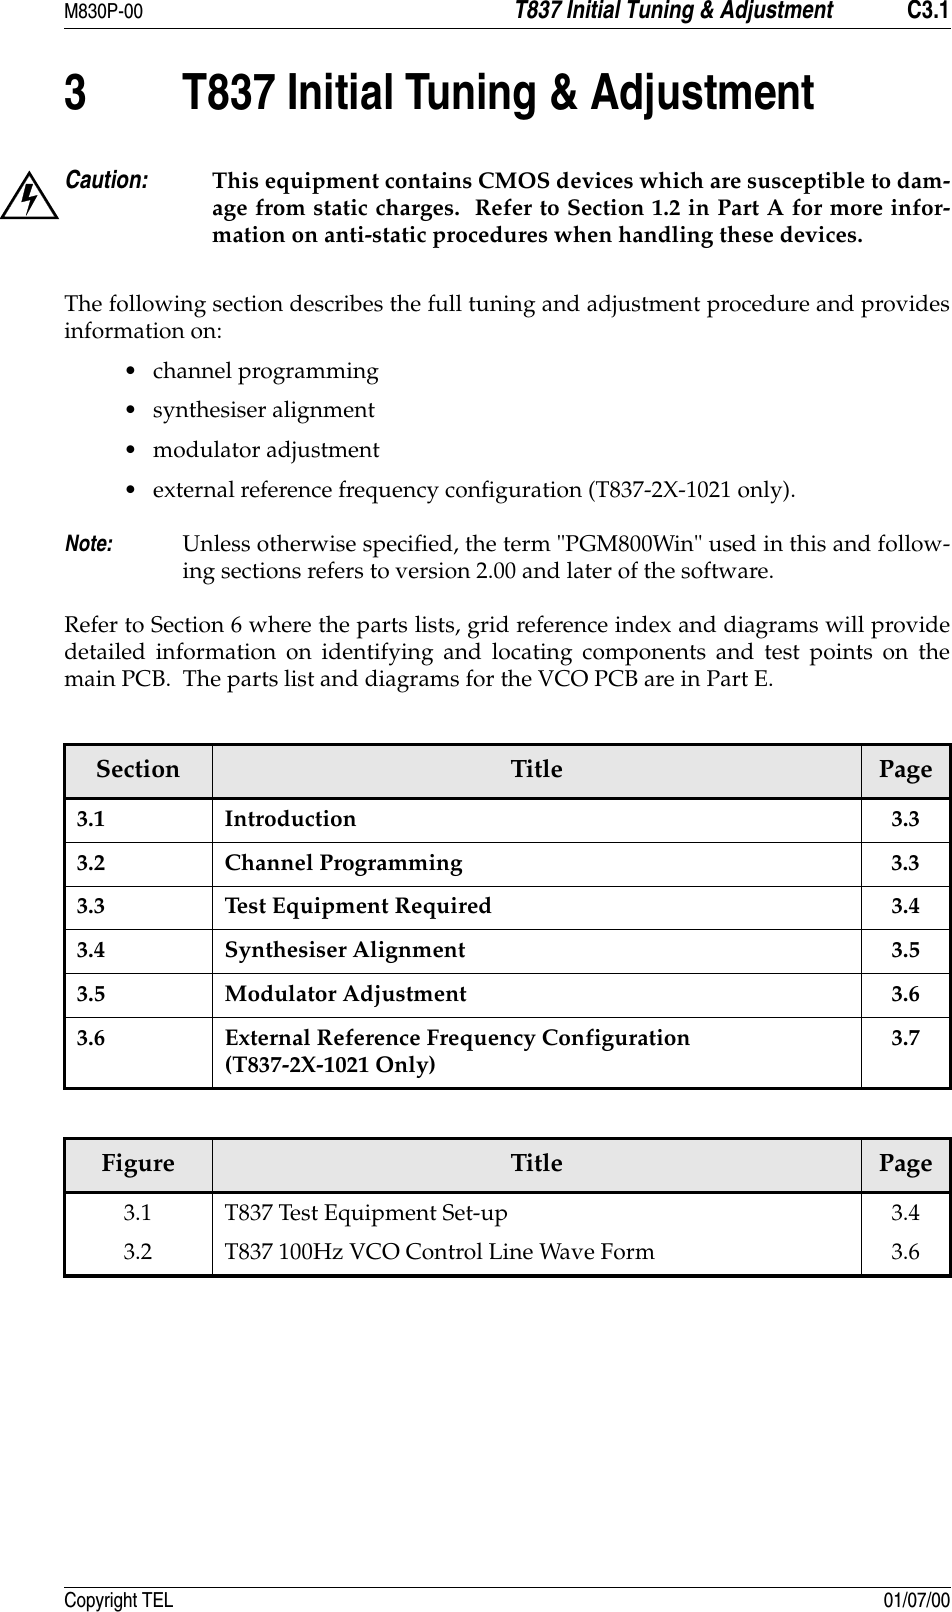 M830P-00 T837 Initial Tuning &amp; Adjustment C3.1Copyright TEL 01/07/003 T837 Initial Tuning &amp; AdjustmentCaution: This equipment contains CMOS devices which are susceptible to dam-age from static charges.  Refer to Section 1.2 in Part A for more infor-mation on anti-static procedures when handling these devices.The following section describes the full tuning and adjustment procedure and providesinformation on:• channel programming • synthesiser alignment • modulator adjustment• external reference frequency configuration (T837-2X-1021 only).Note: Unless otherwise specified, the term &quot;PGM800Win&quot; used in this and follow-ing sections refers to version 2.00 and later of the software.Refer to Section 6 where the parts lists, grid reference index and diagrams will providedetailed information on identifying and locating components and test points on themain PCB.  The parts list and diagrams for the VCO PCB are in Part E.Section Title Page3.1 Introduction 3.33.2 Channel Programming 3.33.3 Test Equipment Required 3.43.4 Synthesiser Alignment 3.53.5 Modulator Adjustment 3.63.6 External Reference Frequency Configuration(T837-2X-1021 Only)3.7Figure Title Page3.13.2T837 Test Equipment Set-upT837 100Hz VCO Control Line Wave Form3.43.6